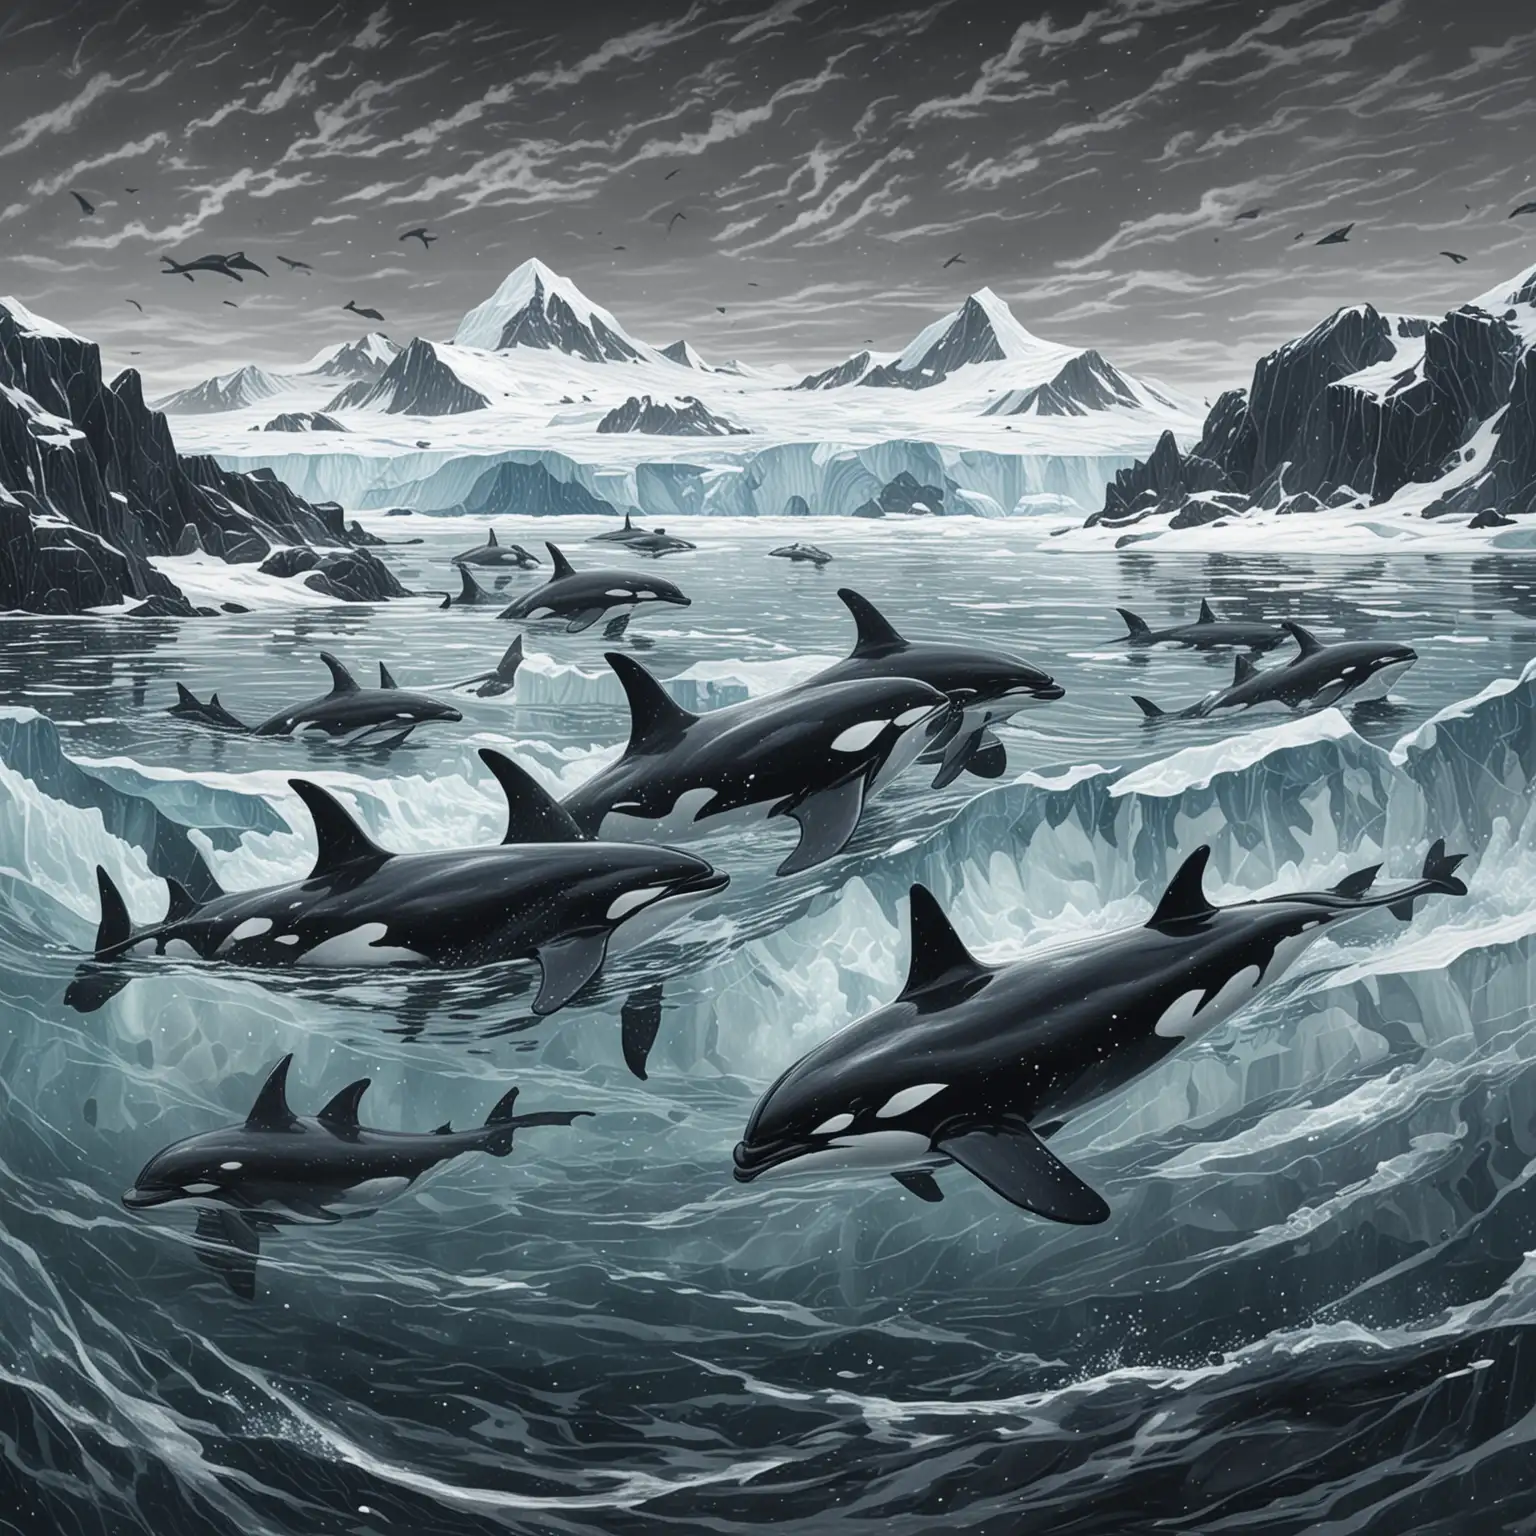 Orca Pod Hunting in Antarctic Waters